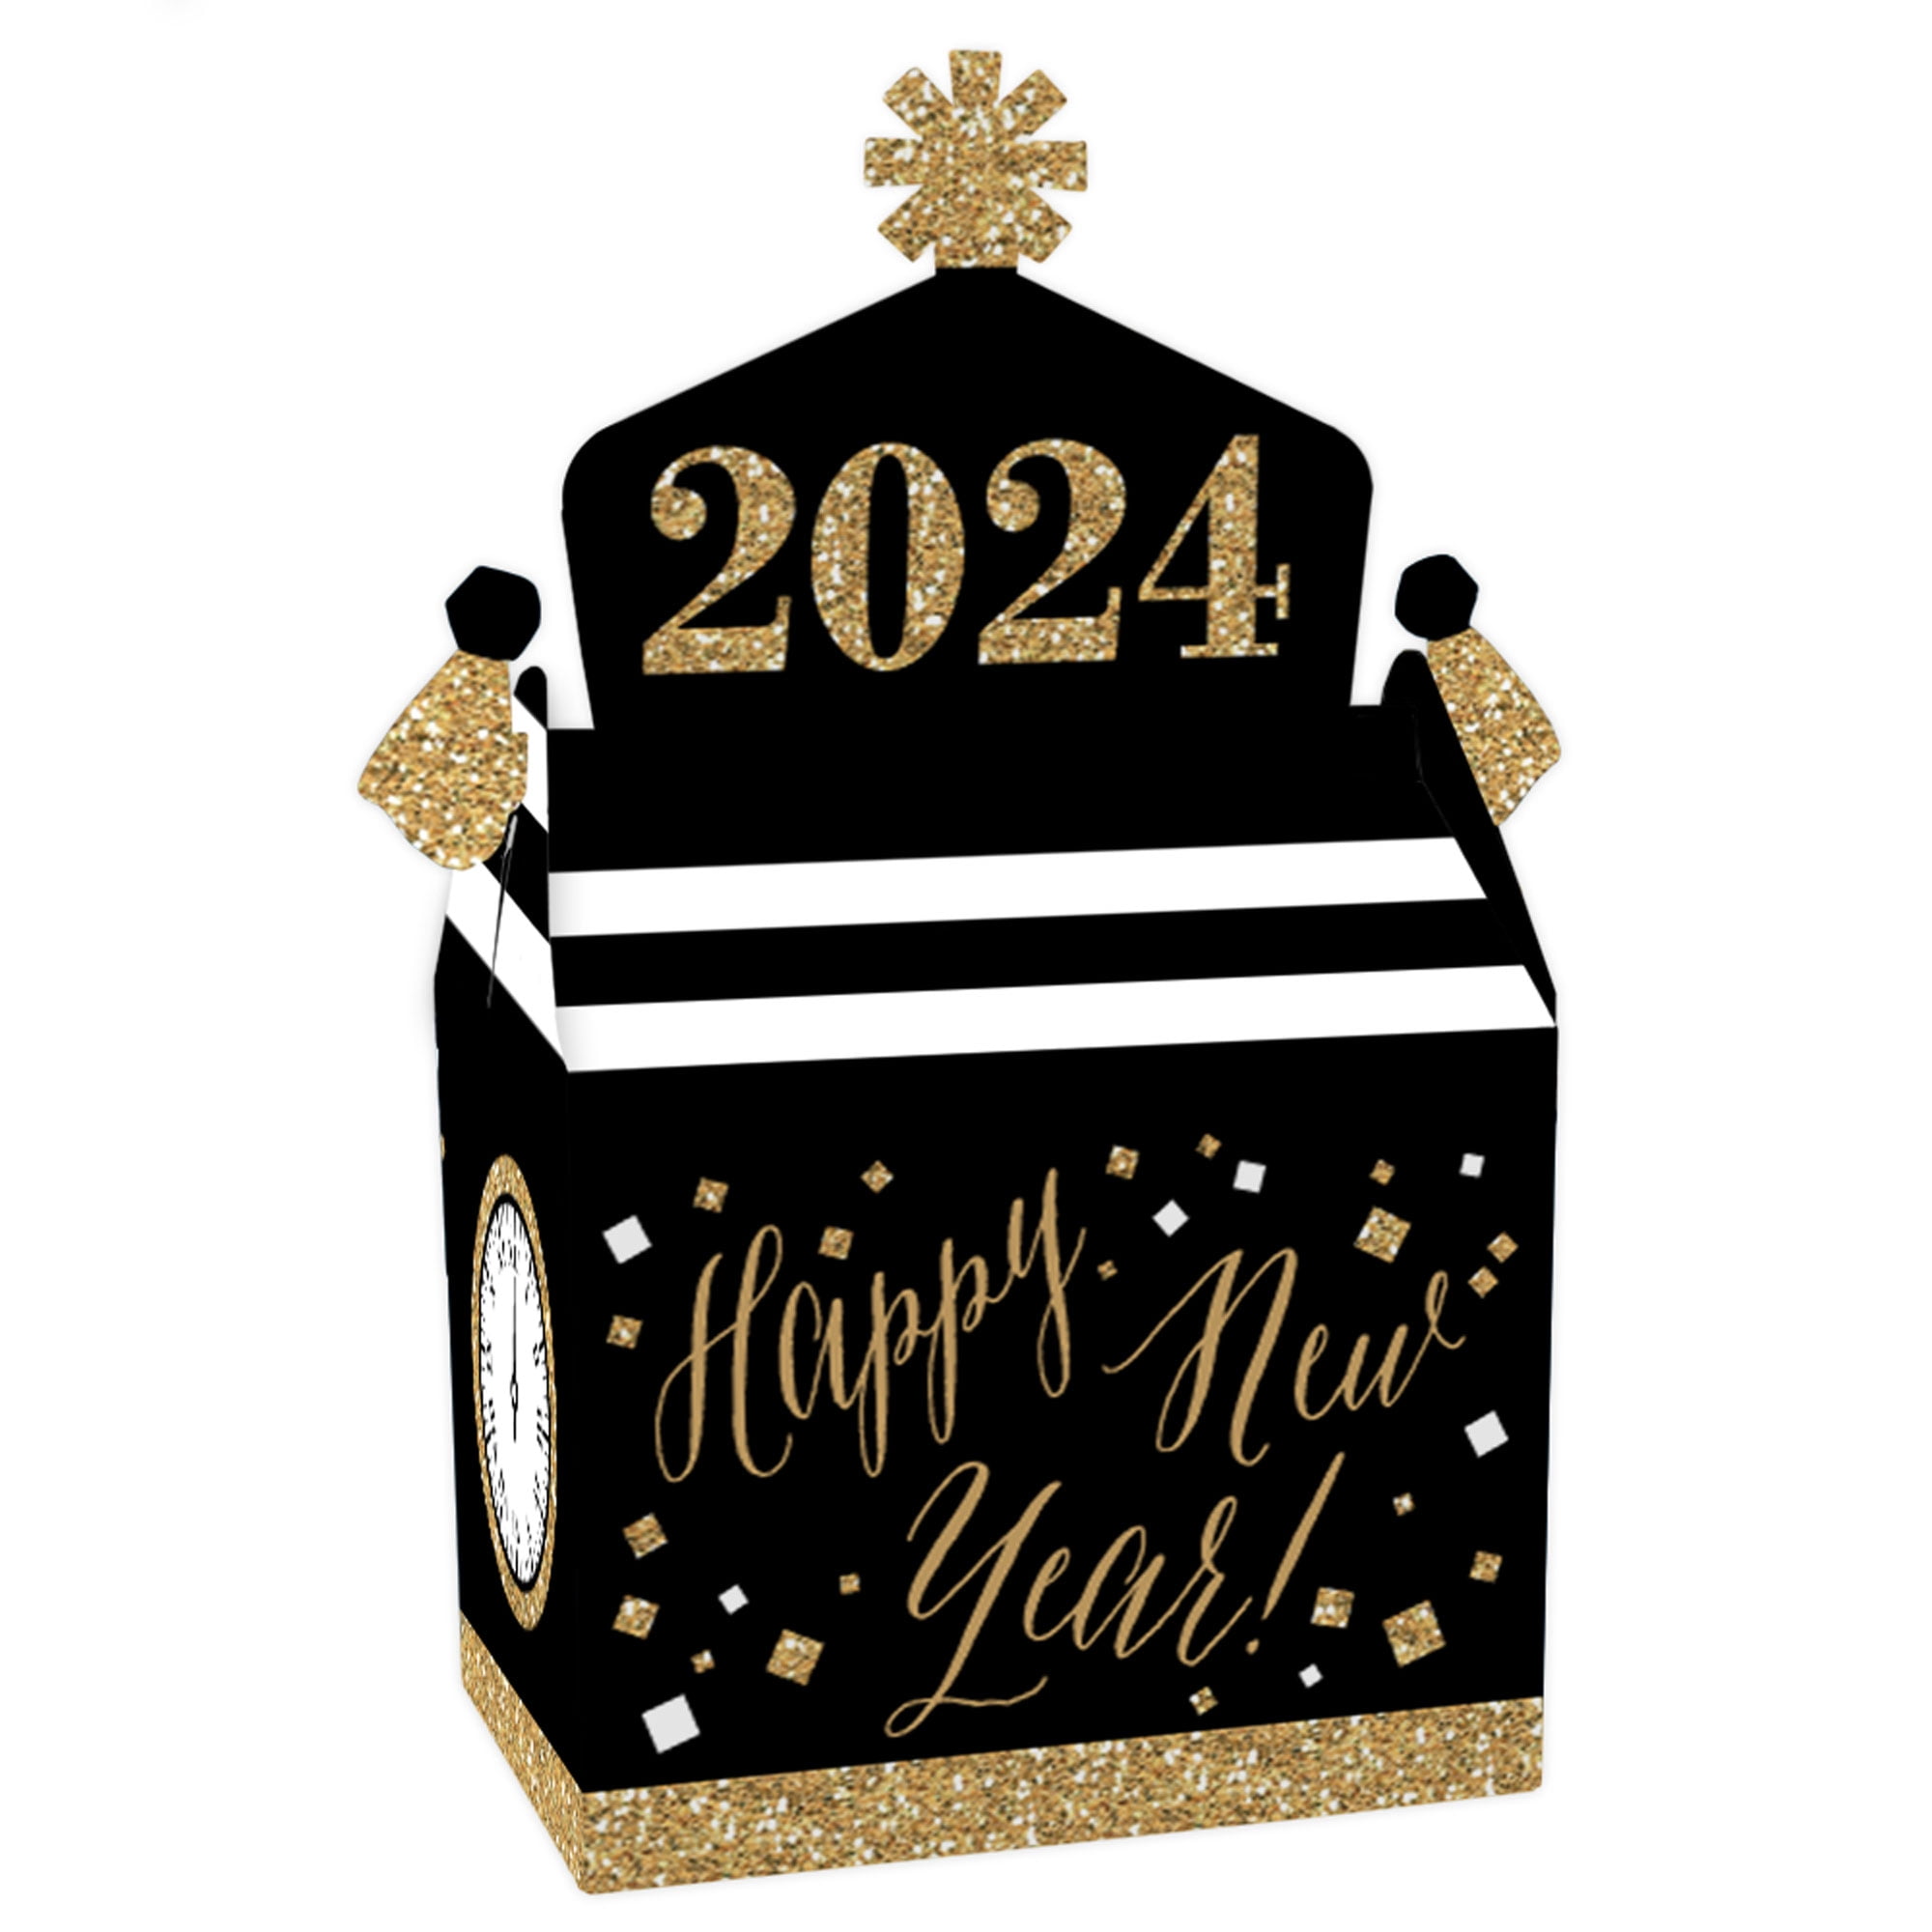 New Years Gift - 60+ Gift Ideas for 2024